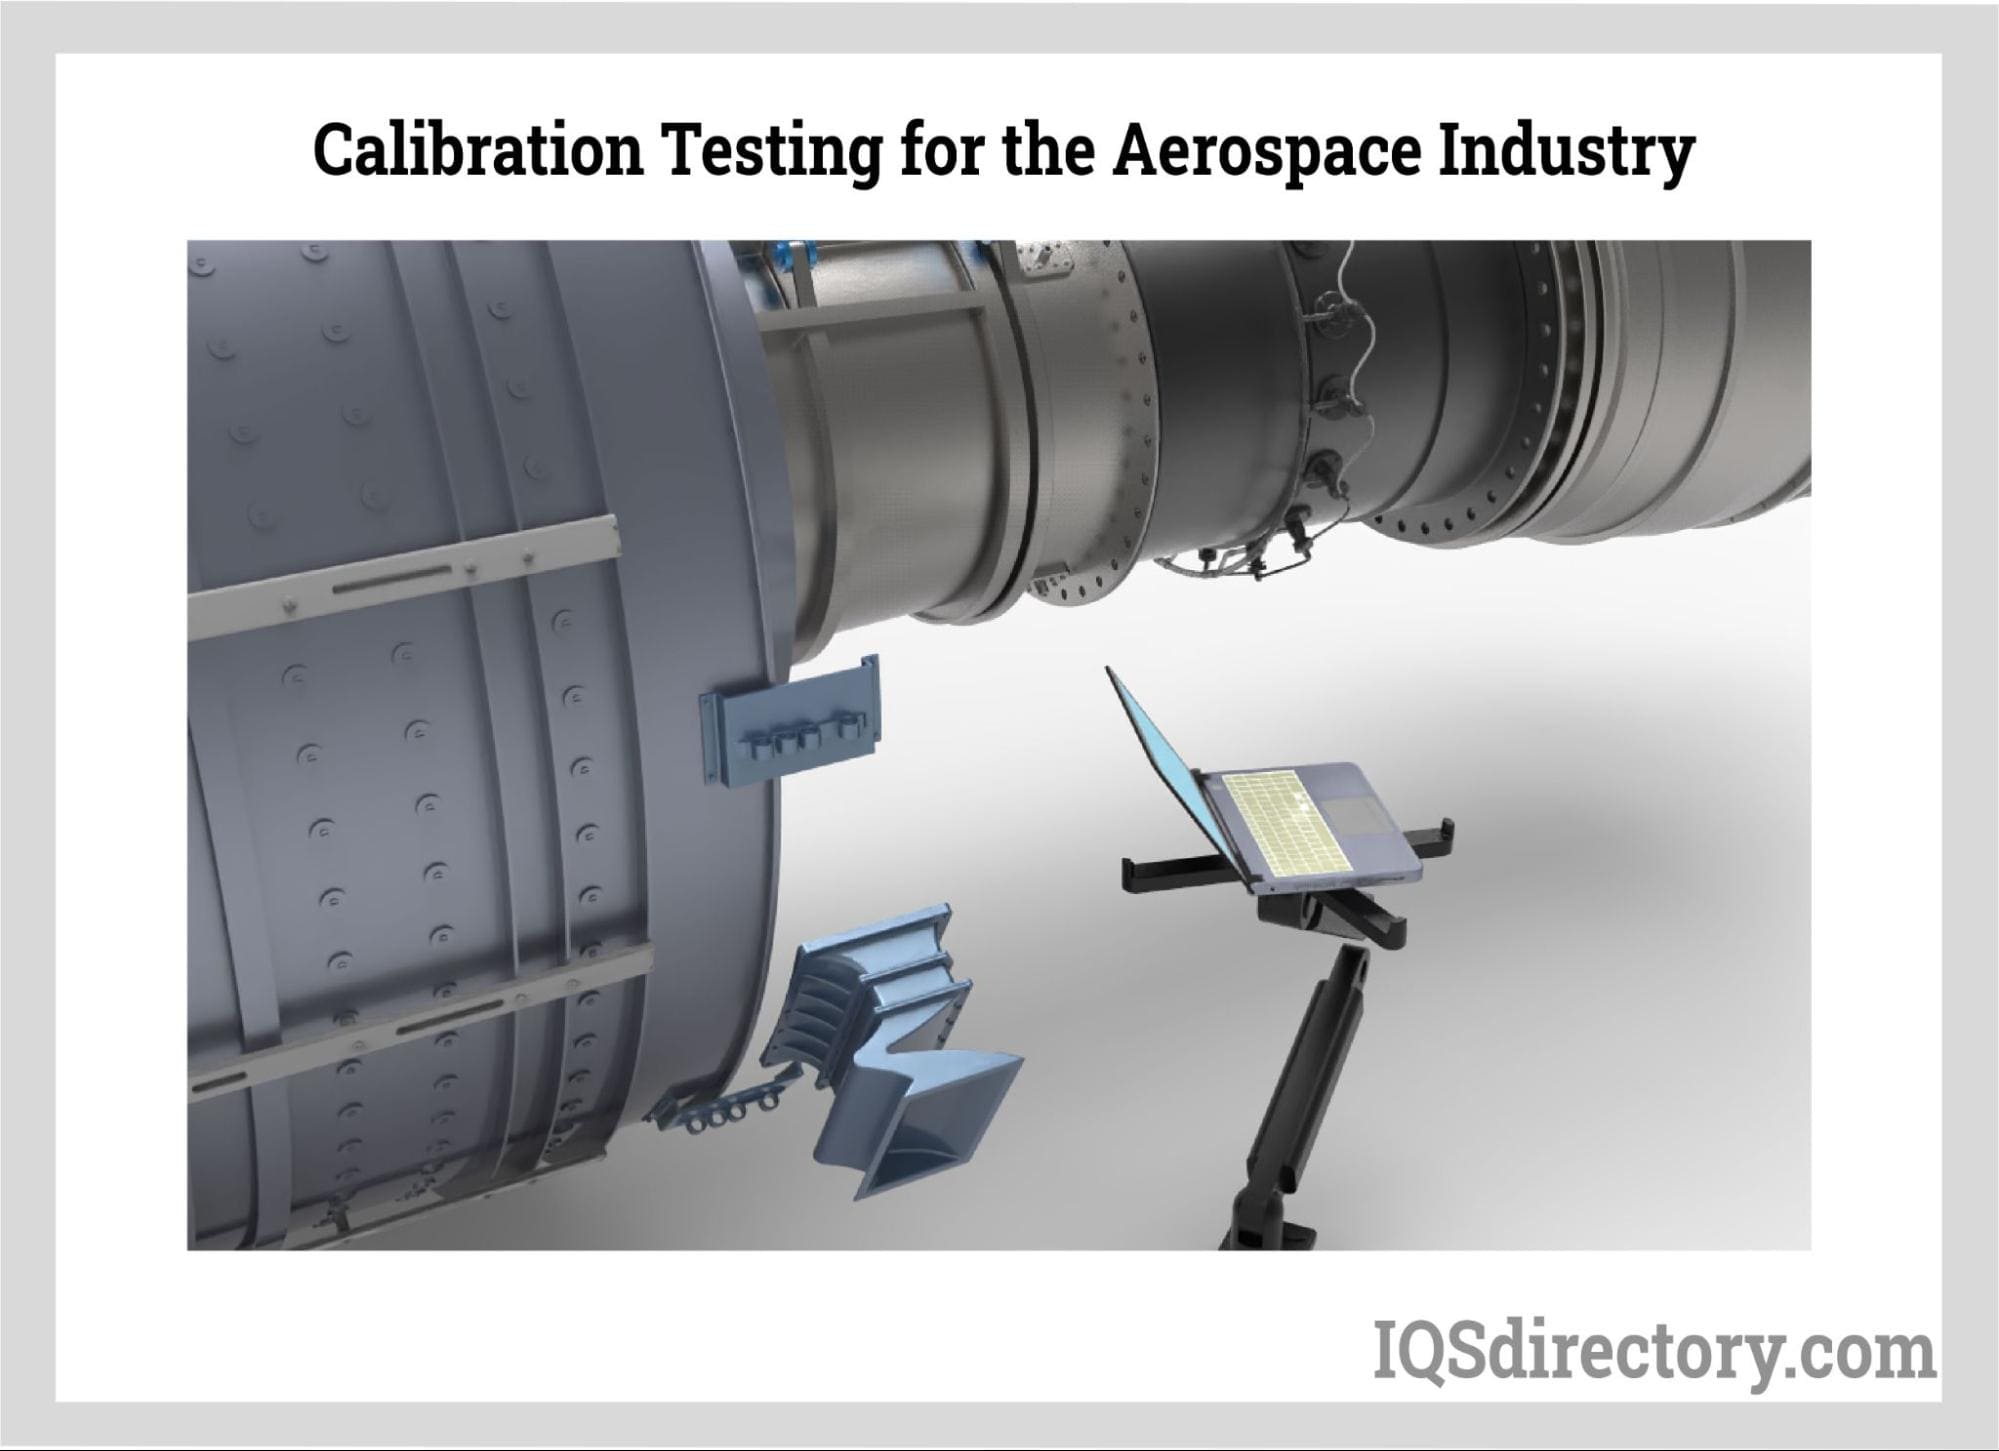 Calibration Testing for the Aerospace Industry